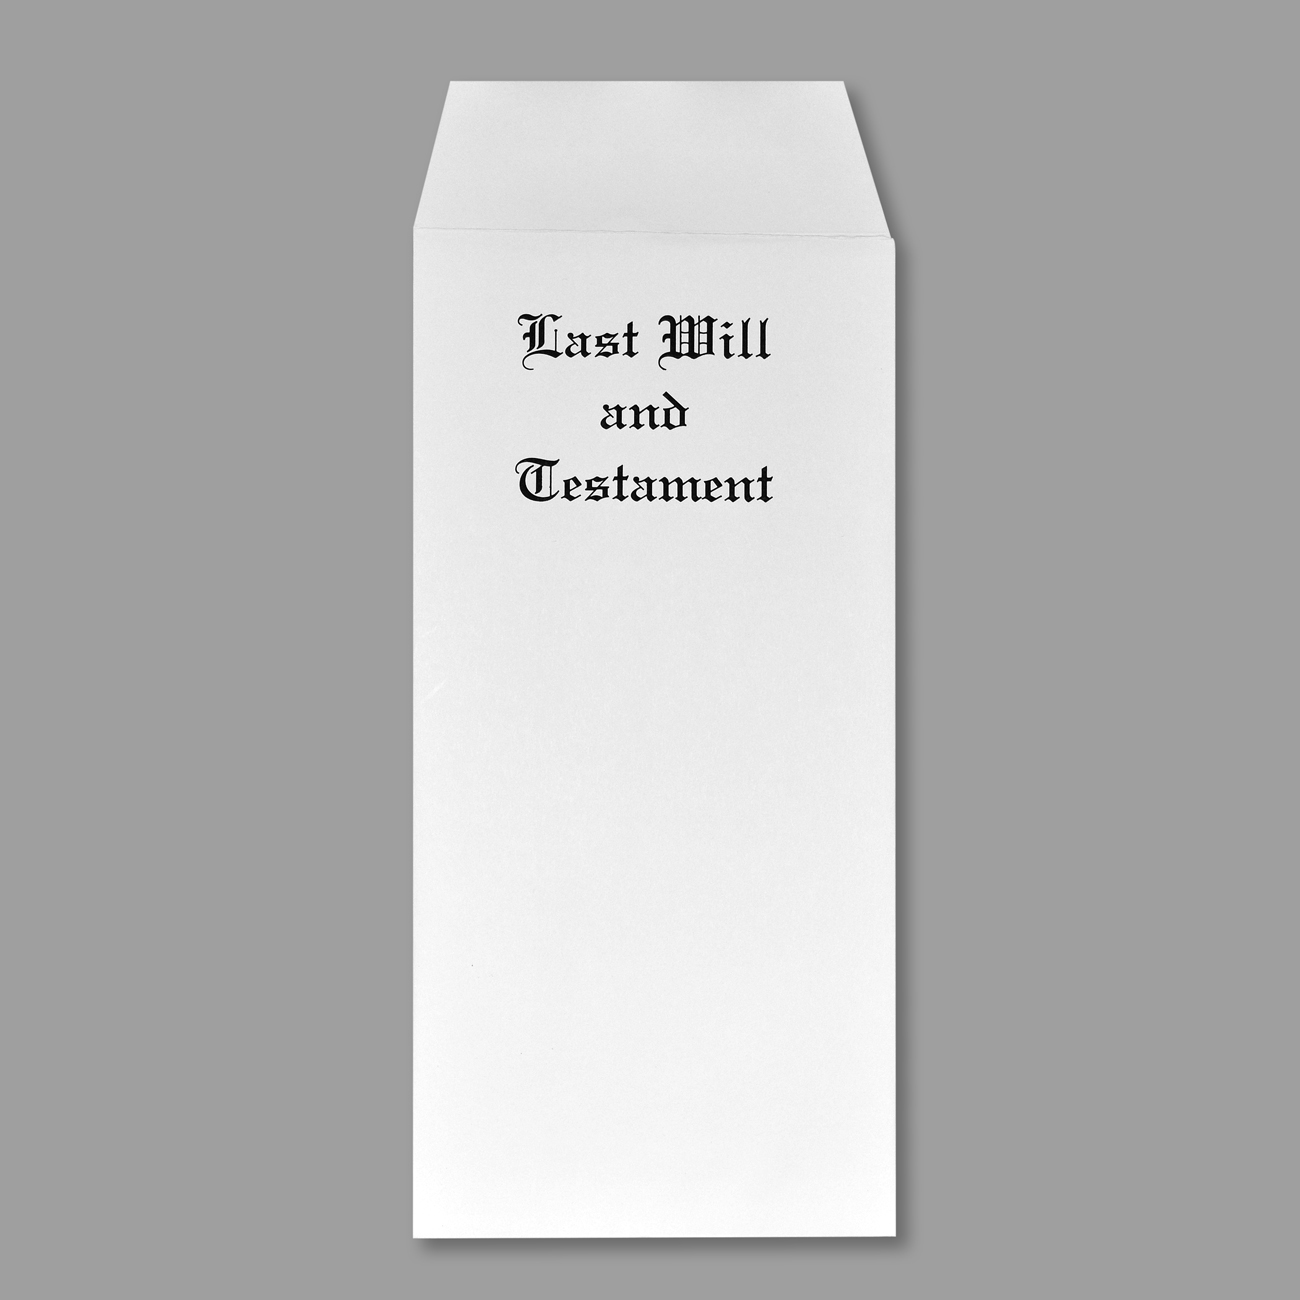 Will Envelopes, Style 801/802 Style 801/802, Will Envelope, Gummed, Engraved "Last Will and Testament", Bright White Wove Stock, Recycled, 30% PCW, 50/PK